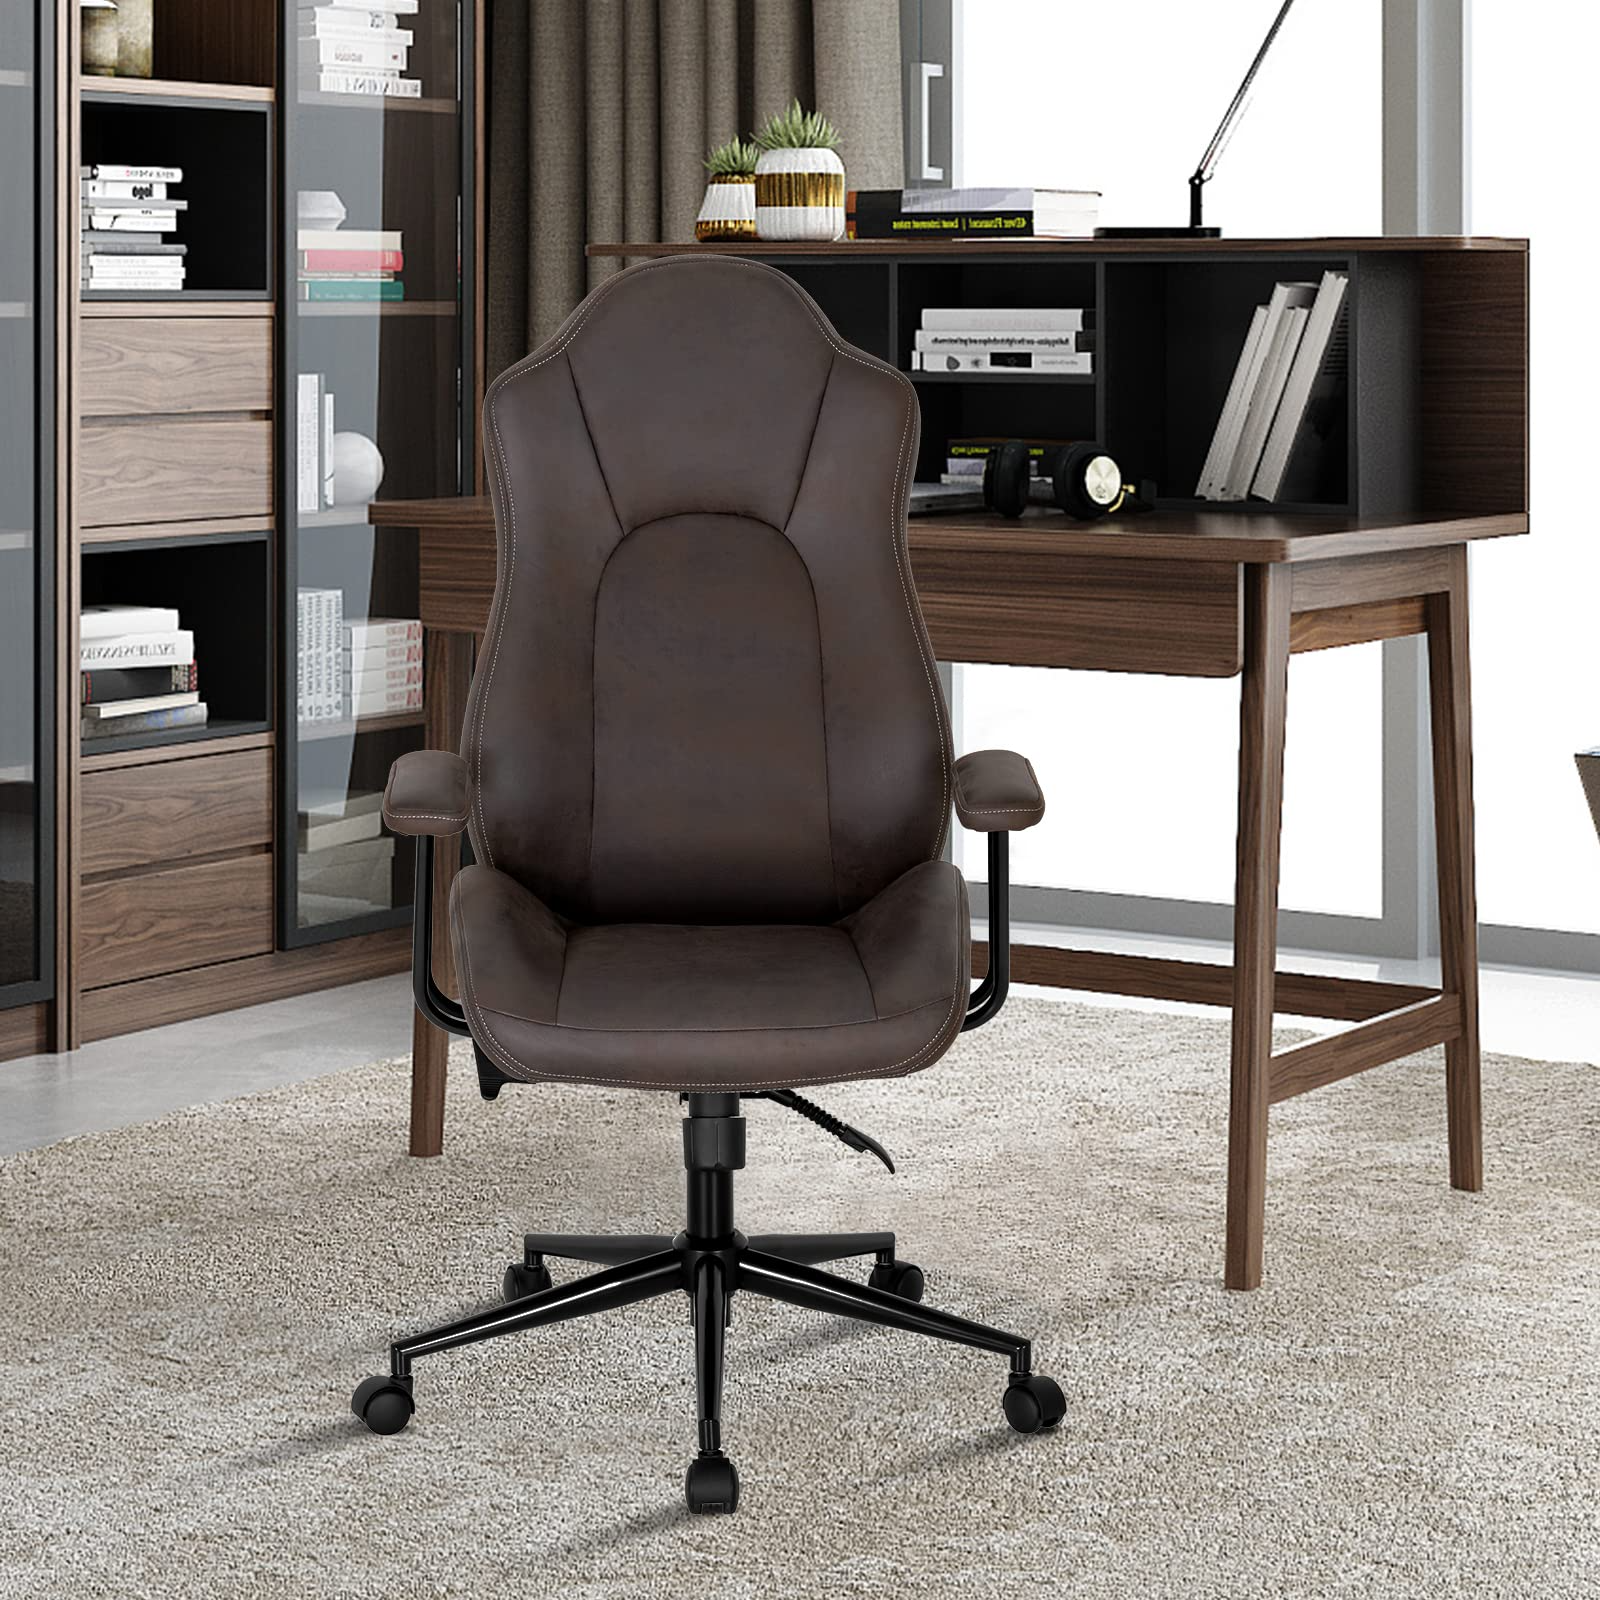 Ergonomic Leathaire Task Chair with Comfortable Padded Seat & Detachable Armrests